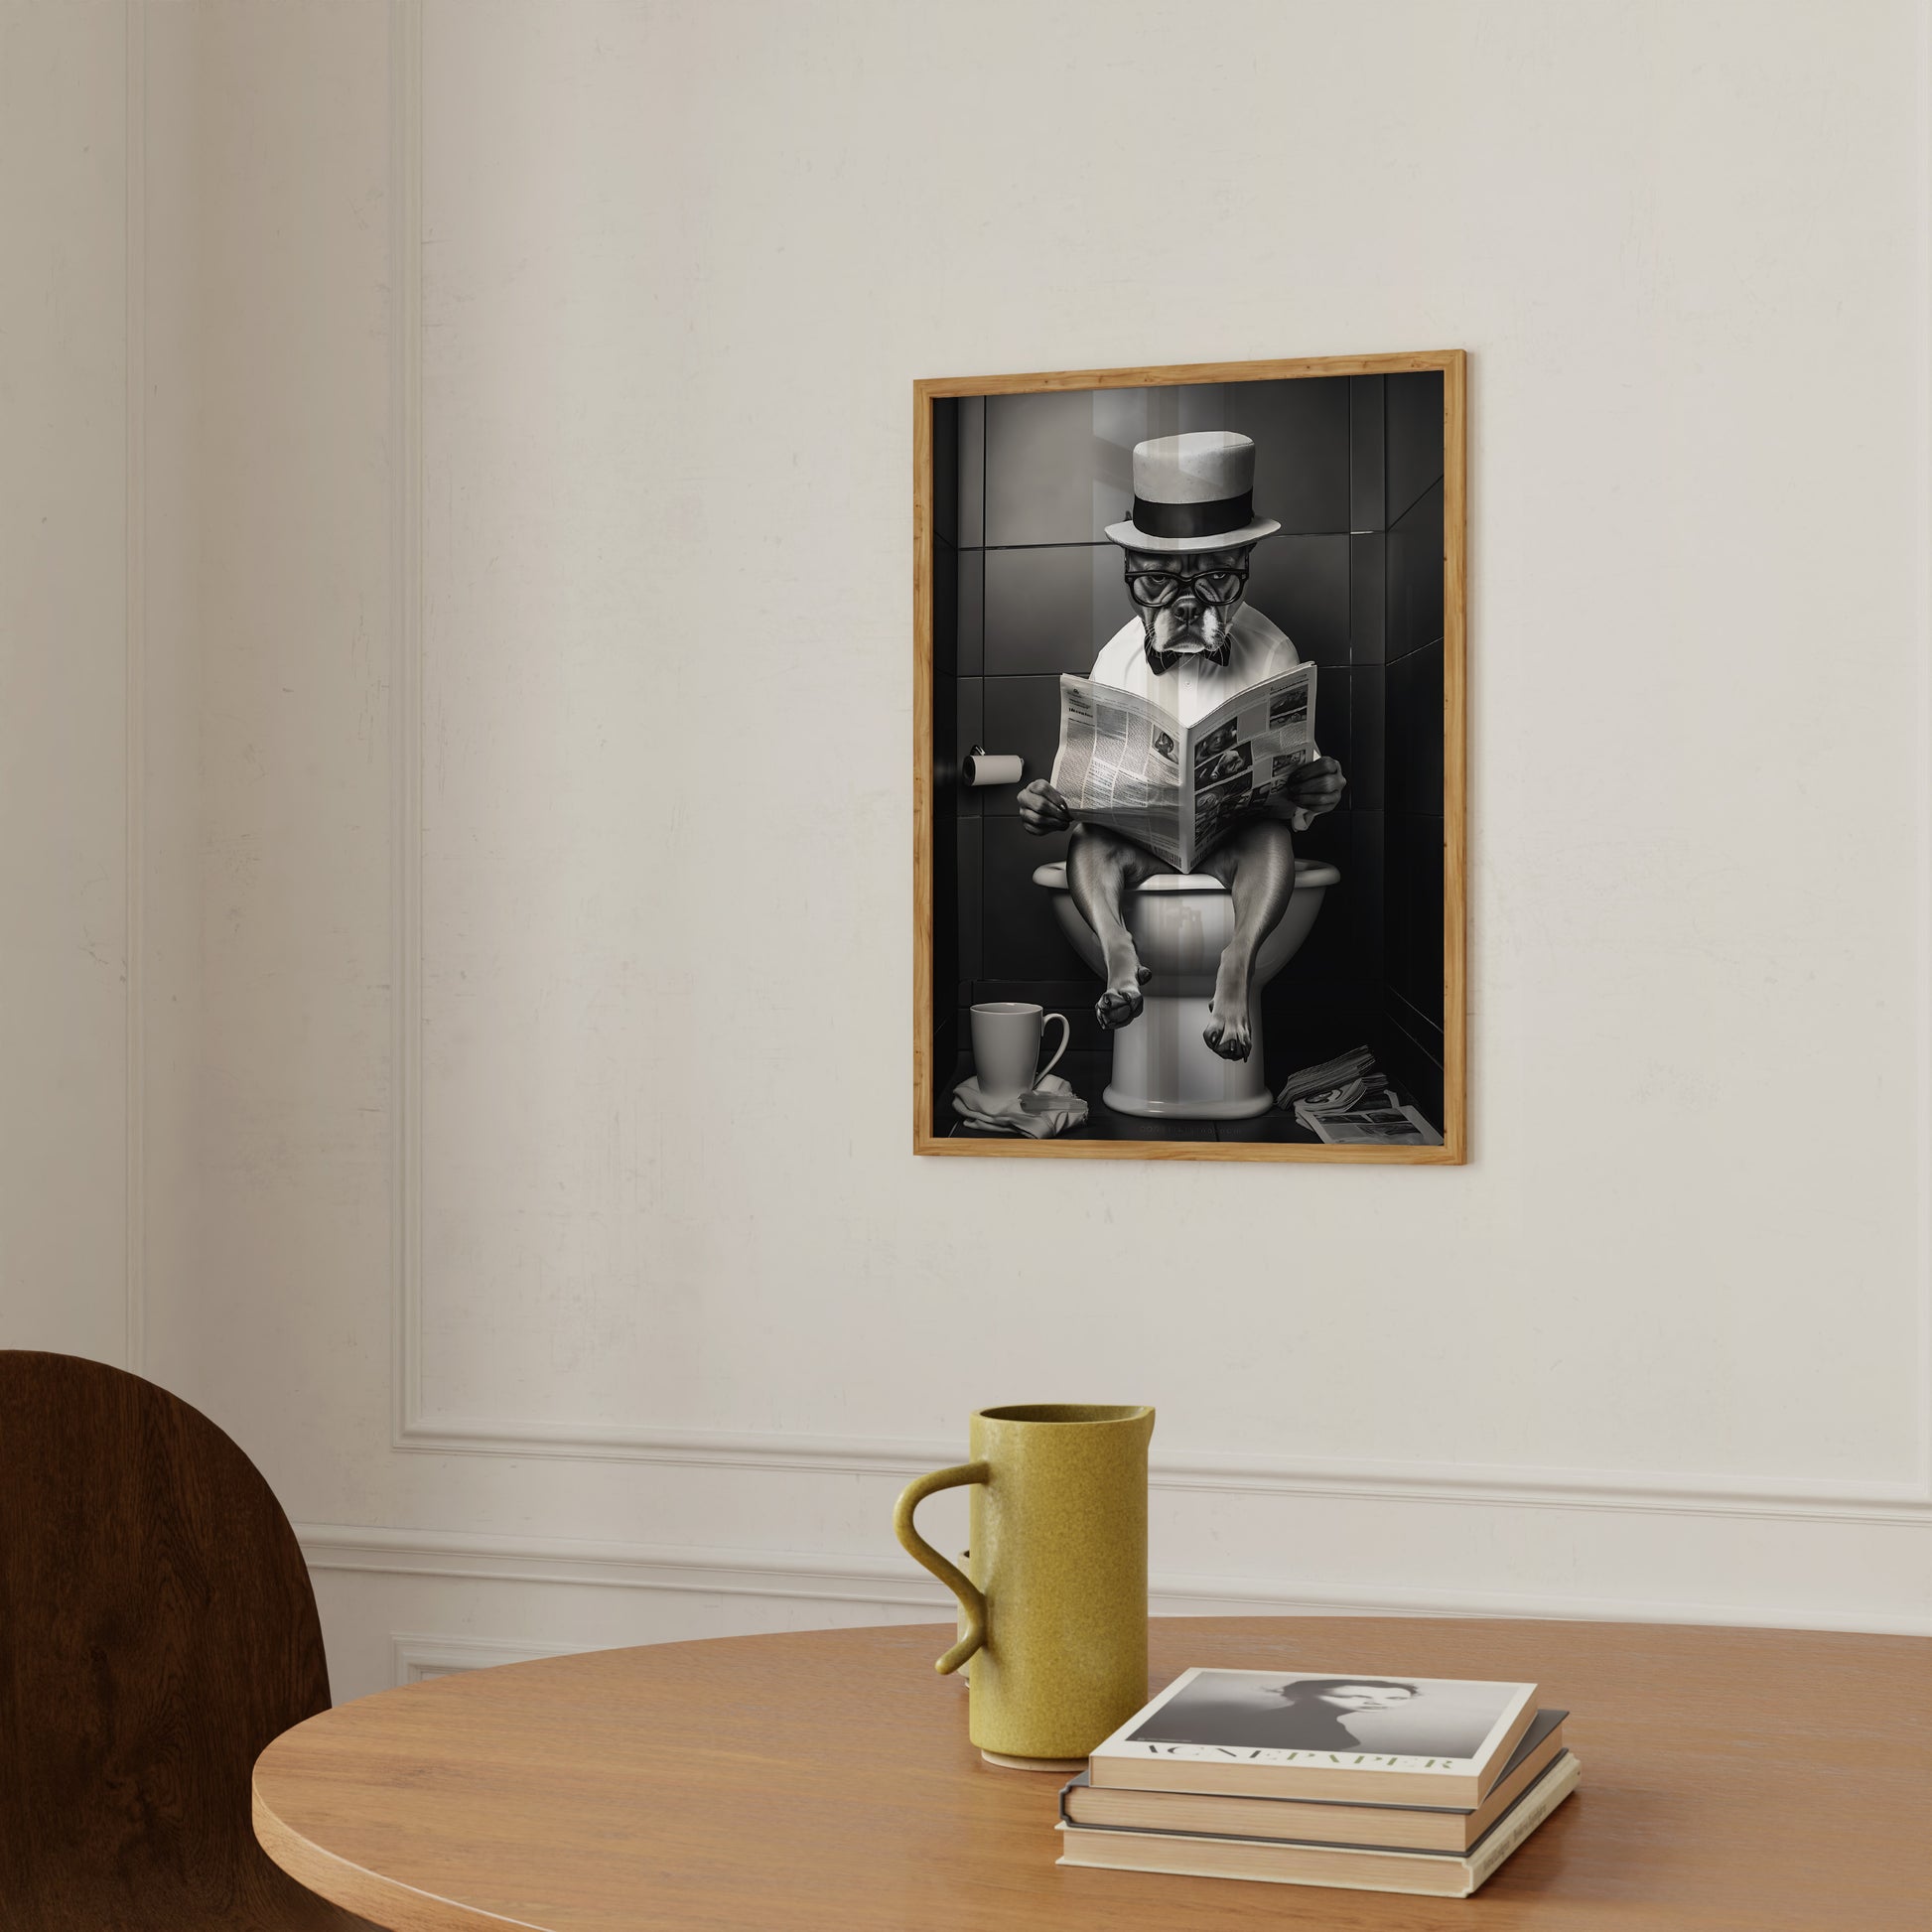 A whimsical painting of a robot reading a newspaper while sitting on a toilet, displayed in a room with a mug and books.